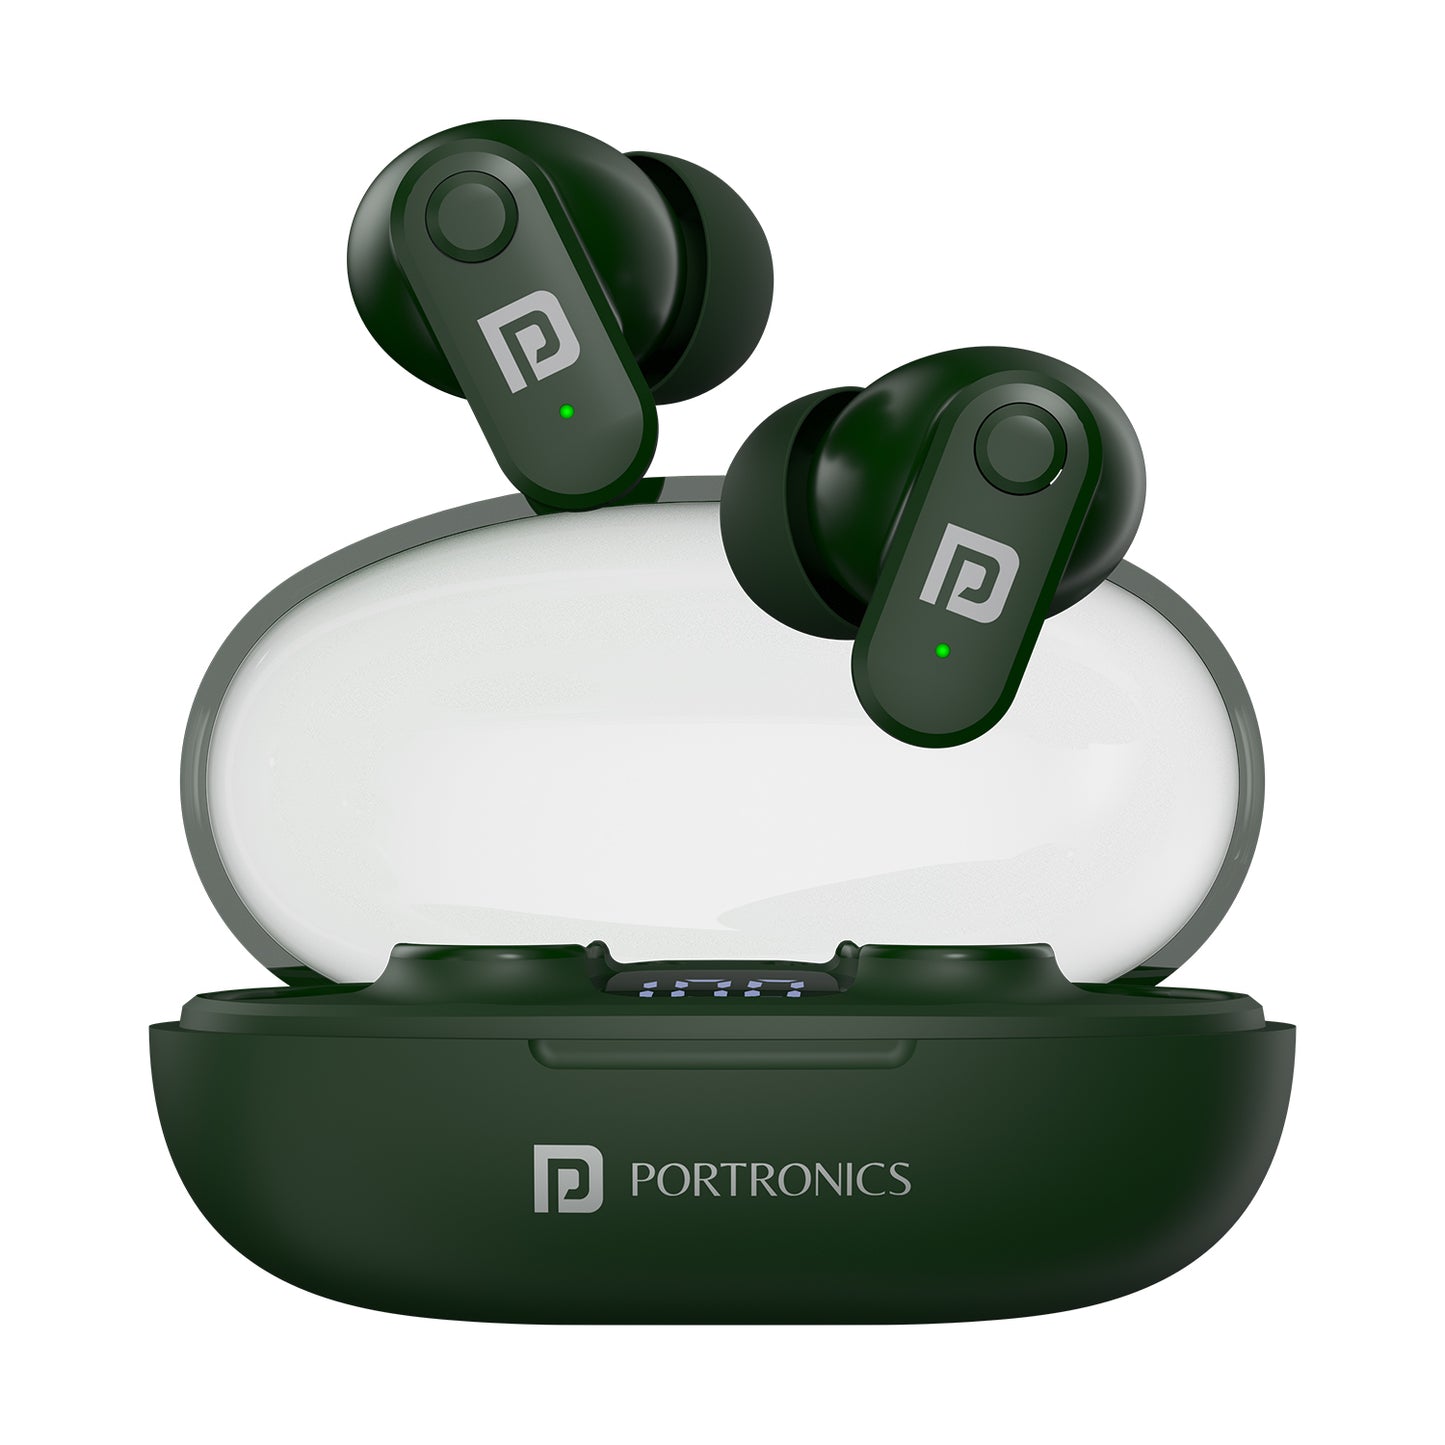 Portronics Harmonics Twins s16 Smart wireless TWS earbuds| earbuds with noise cancelling online| best anc earbuds online